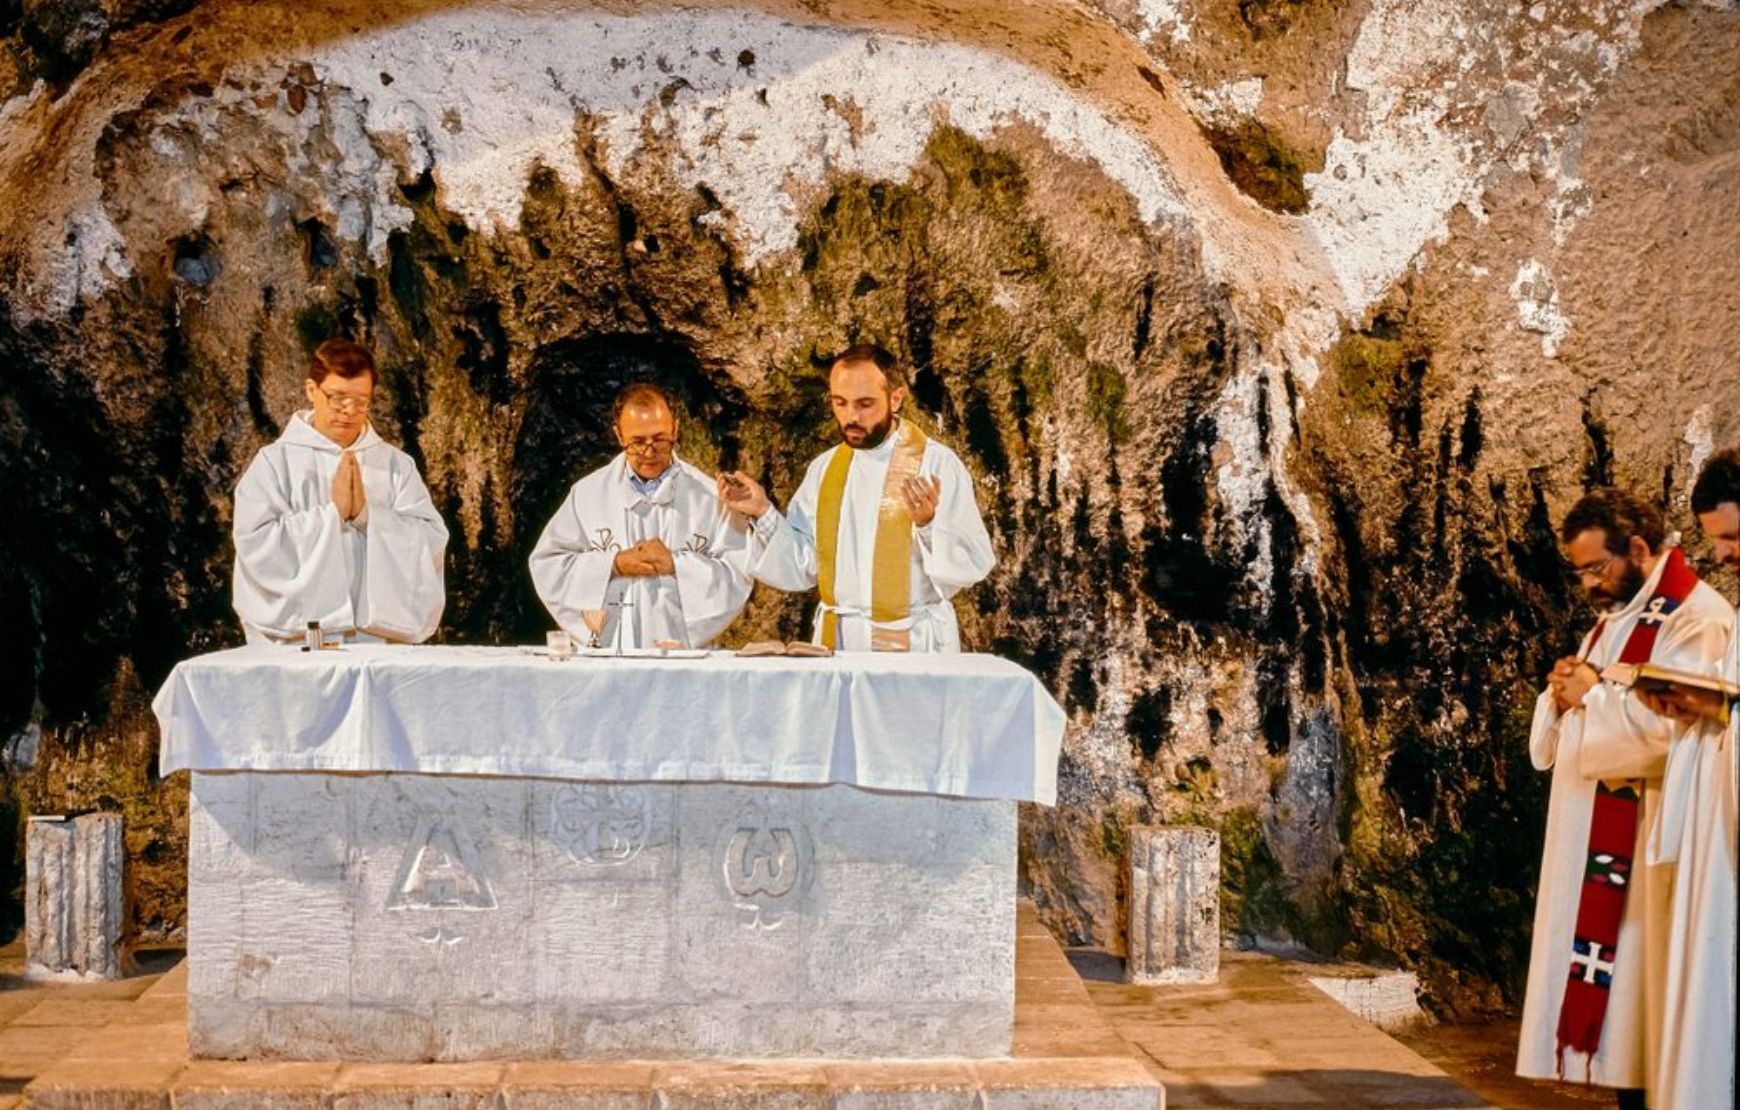 Praying session in a cave church in Turkey